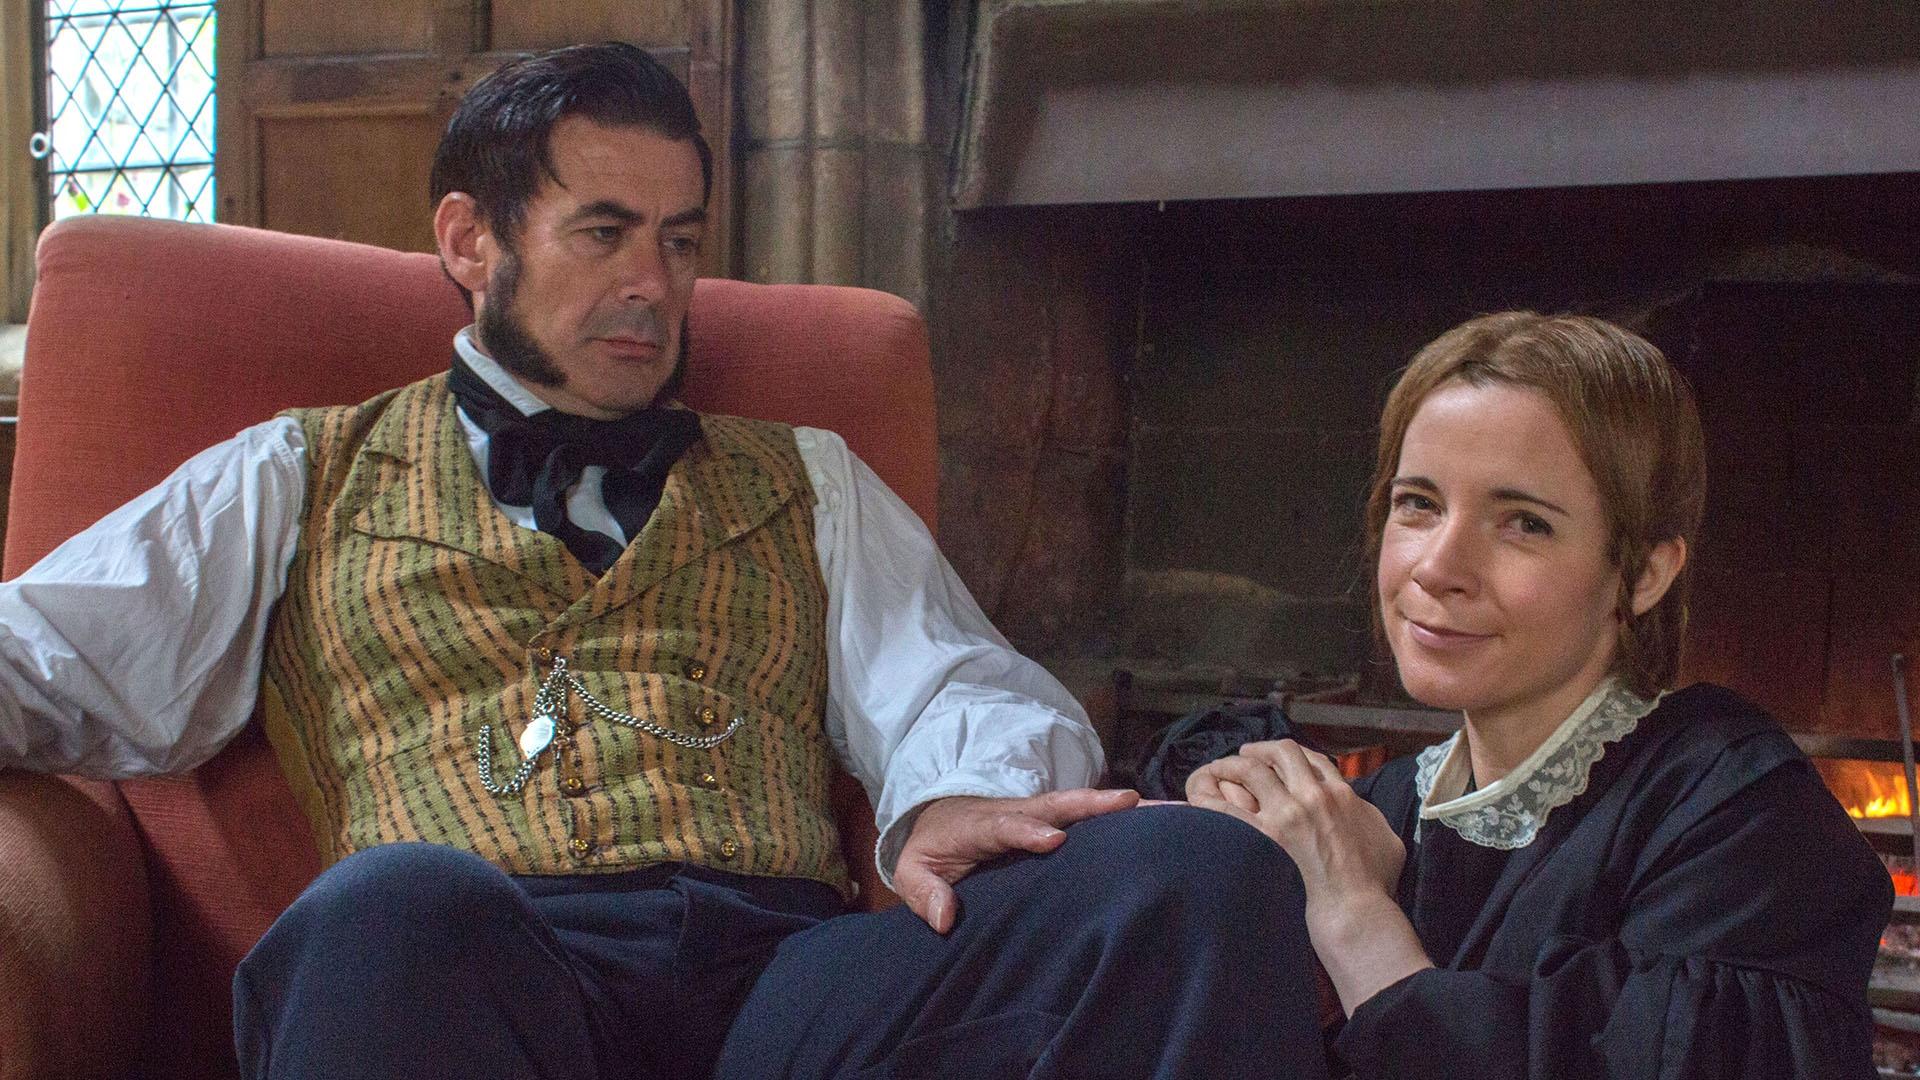 Lucy Worsley sitting with man dressed in period costume.